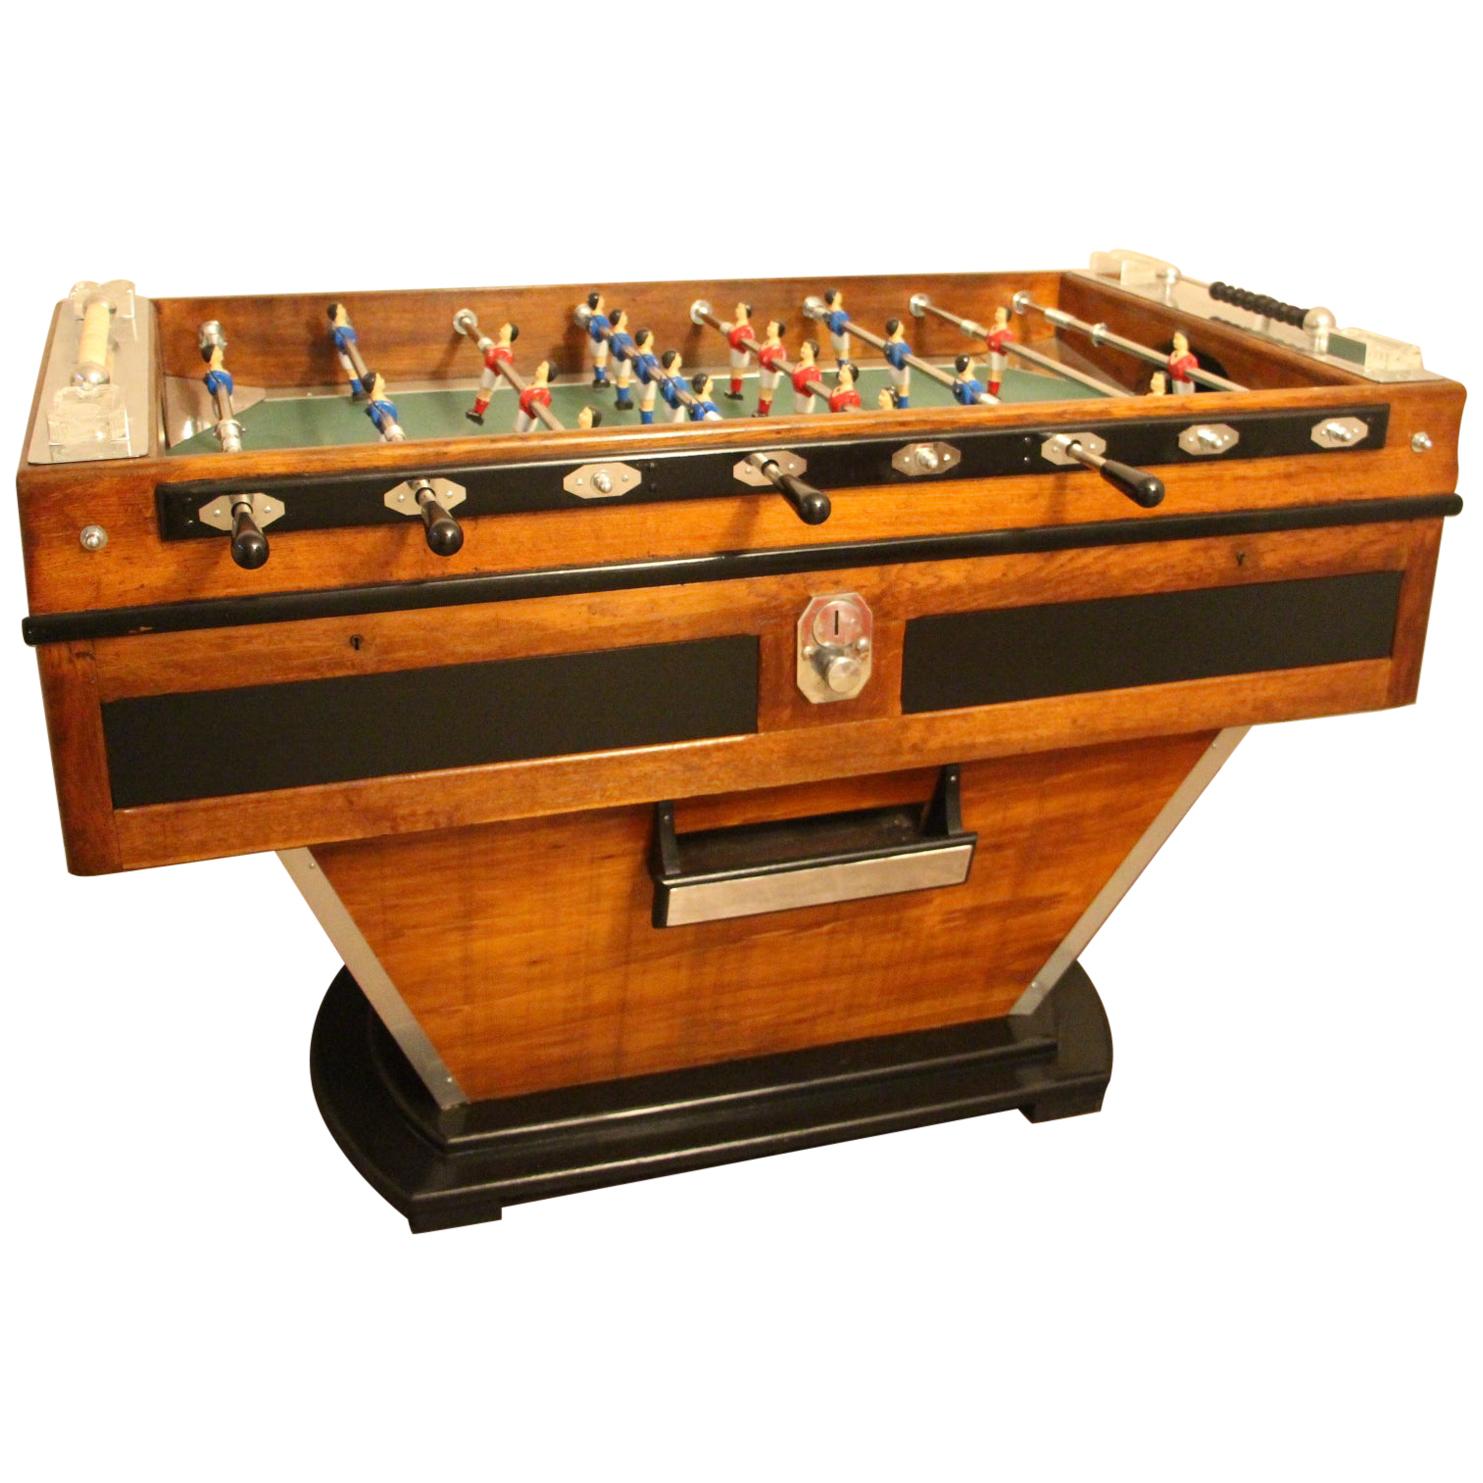 Midcentury French Cafe's Foosball Table, Soccer Table, Football Table